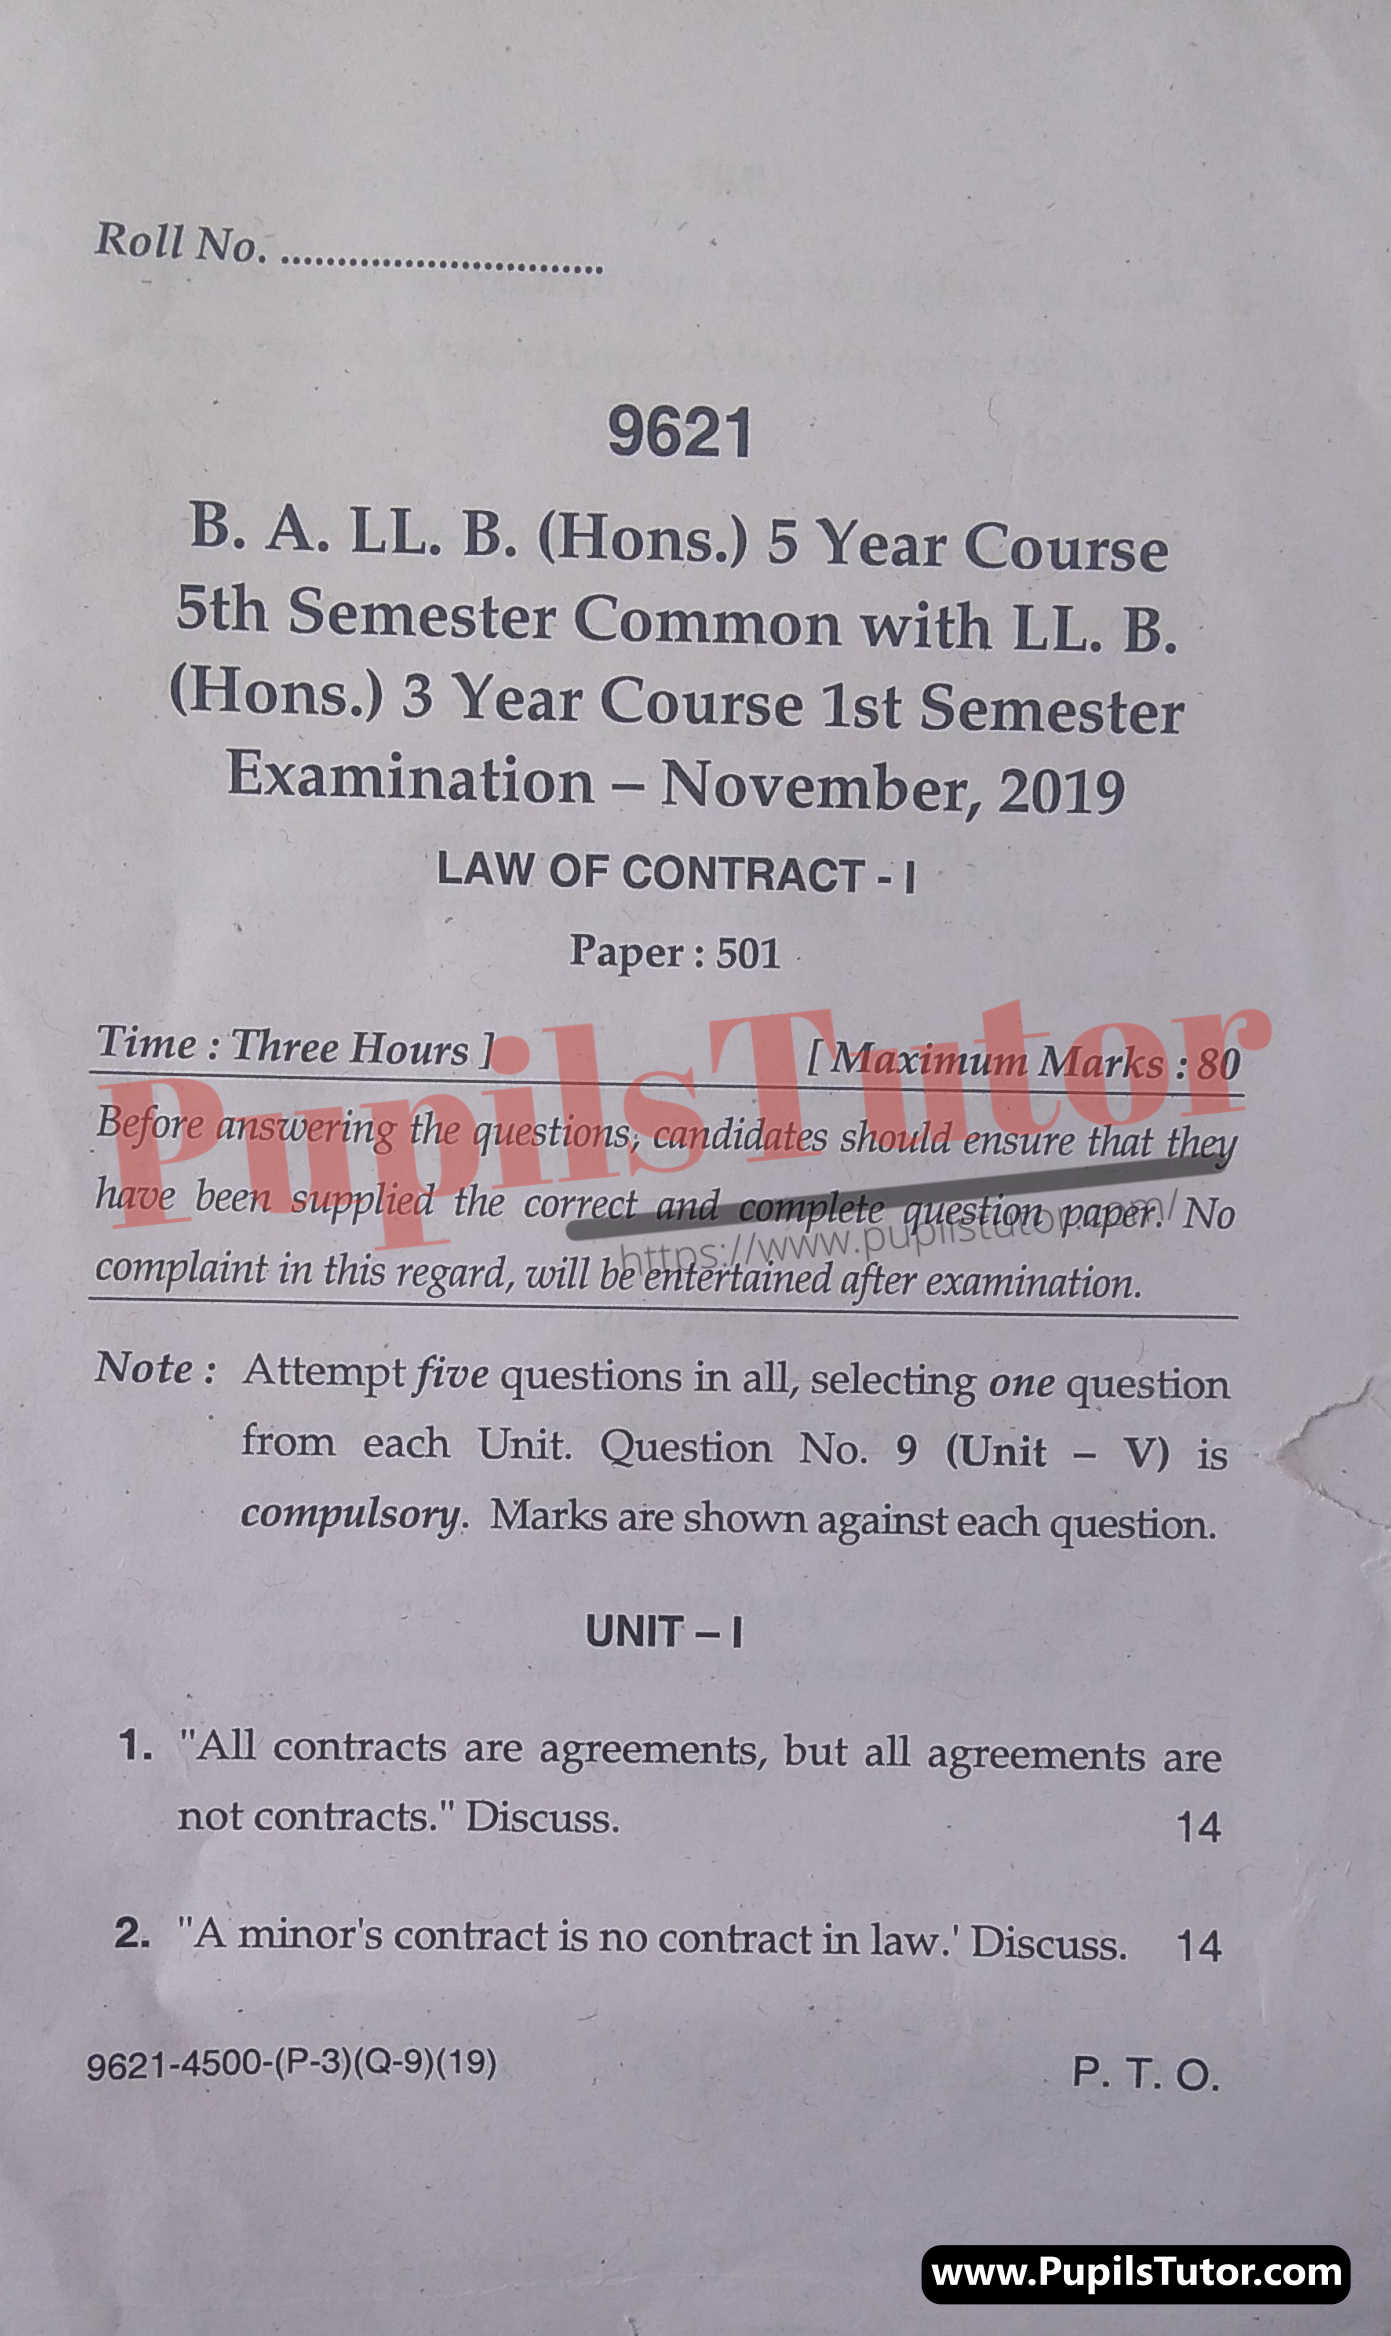 MDU (Maharshi Dayanand University, Rohtak Haryana) BA LLB Regular Exam Fifth Semester Previous Year Law Of Contract Question Paper For November, 2019 Exam (Question Paper Page 1) - pupilstutor.com